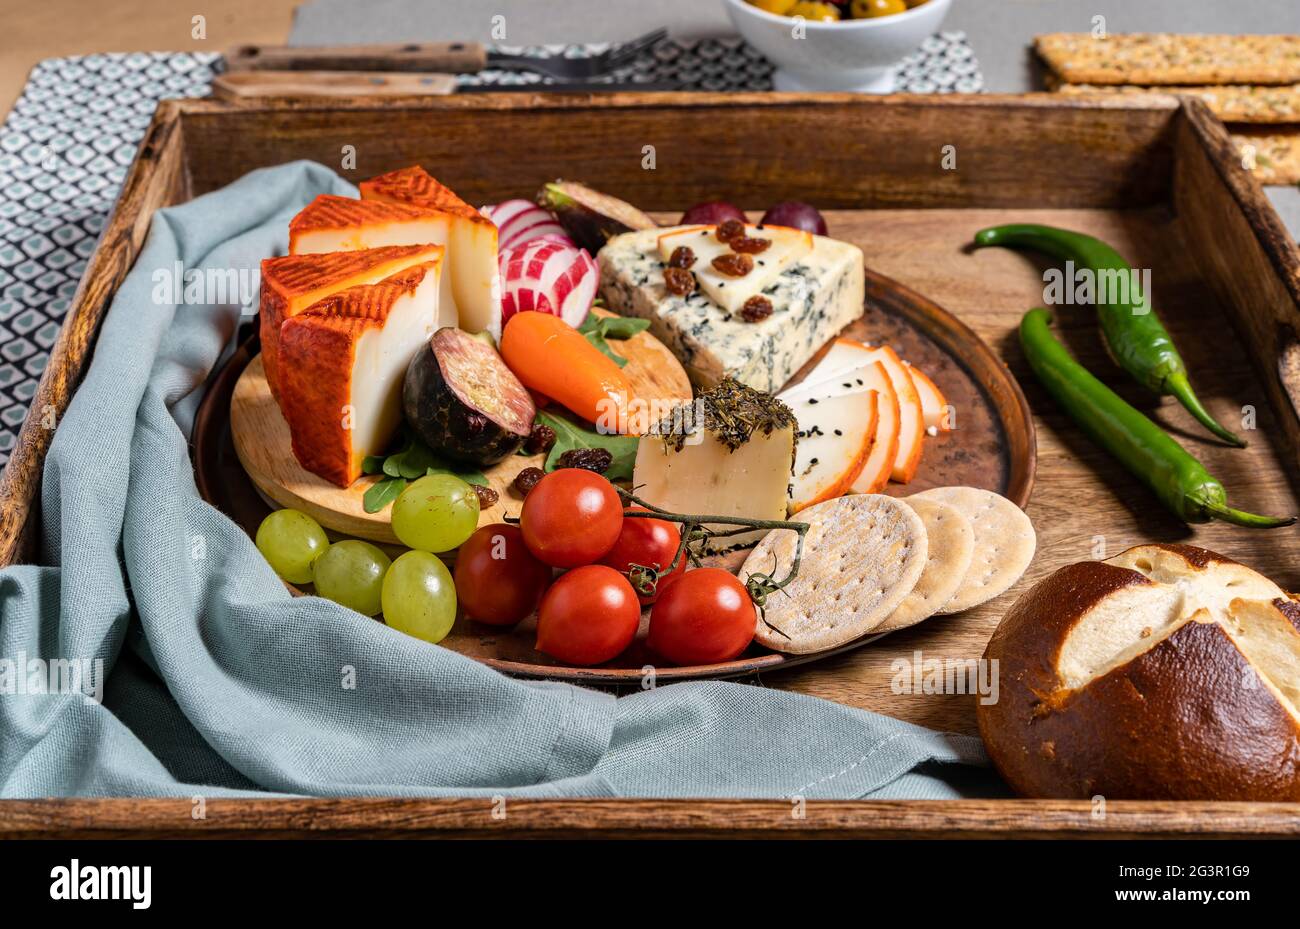 Food photography of cheese board on a wooden tray with olives, crackers, cherry tomatoes, asparagus and peppers stuffed with cream cheese. Mediterrane Stock Photo